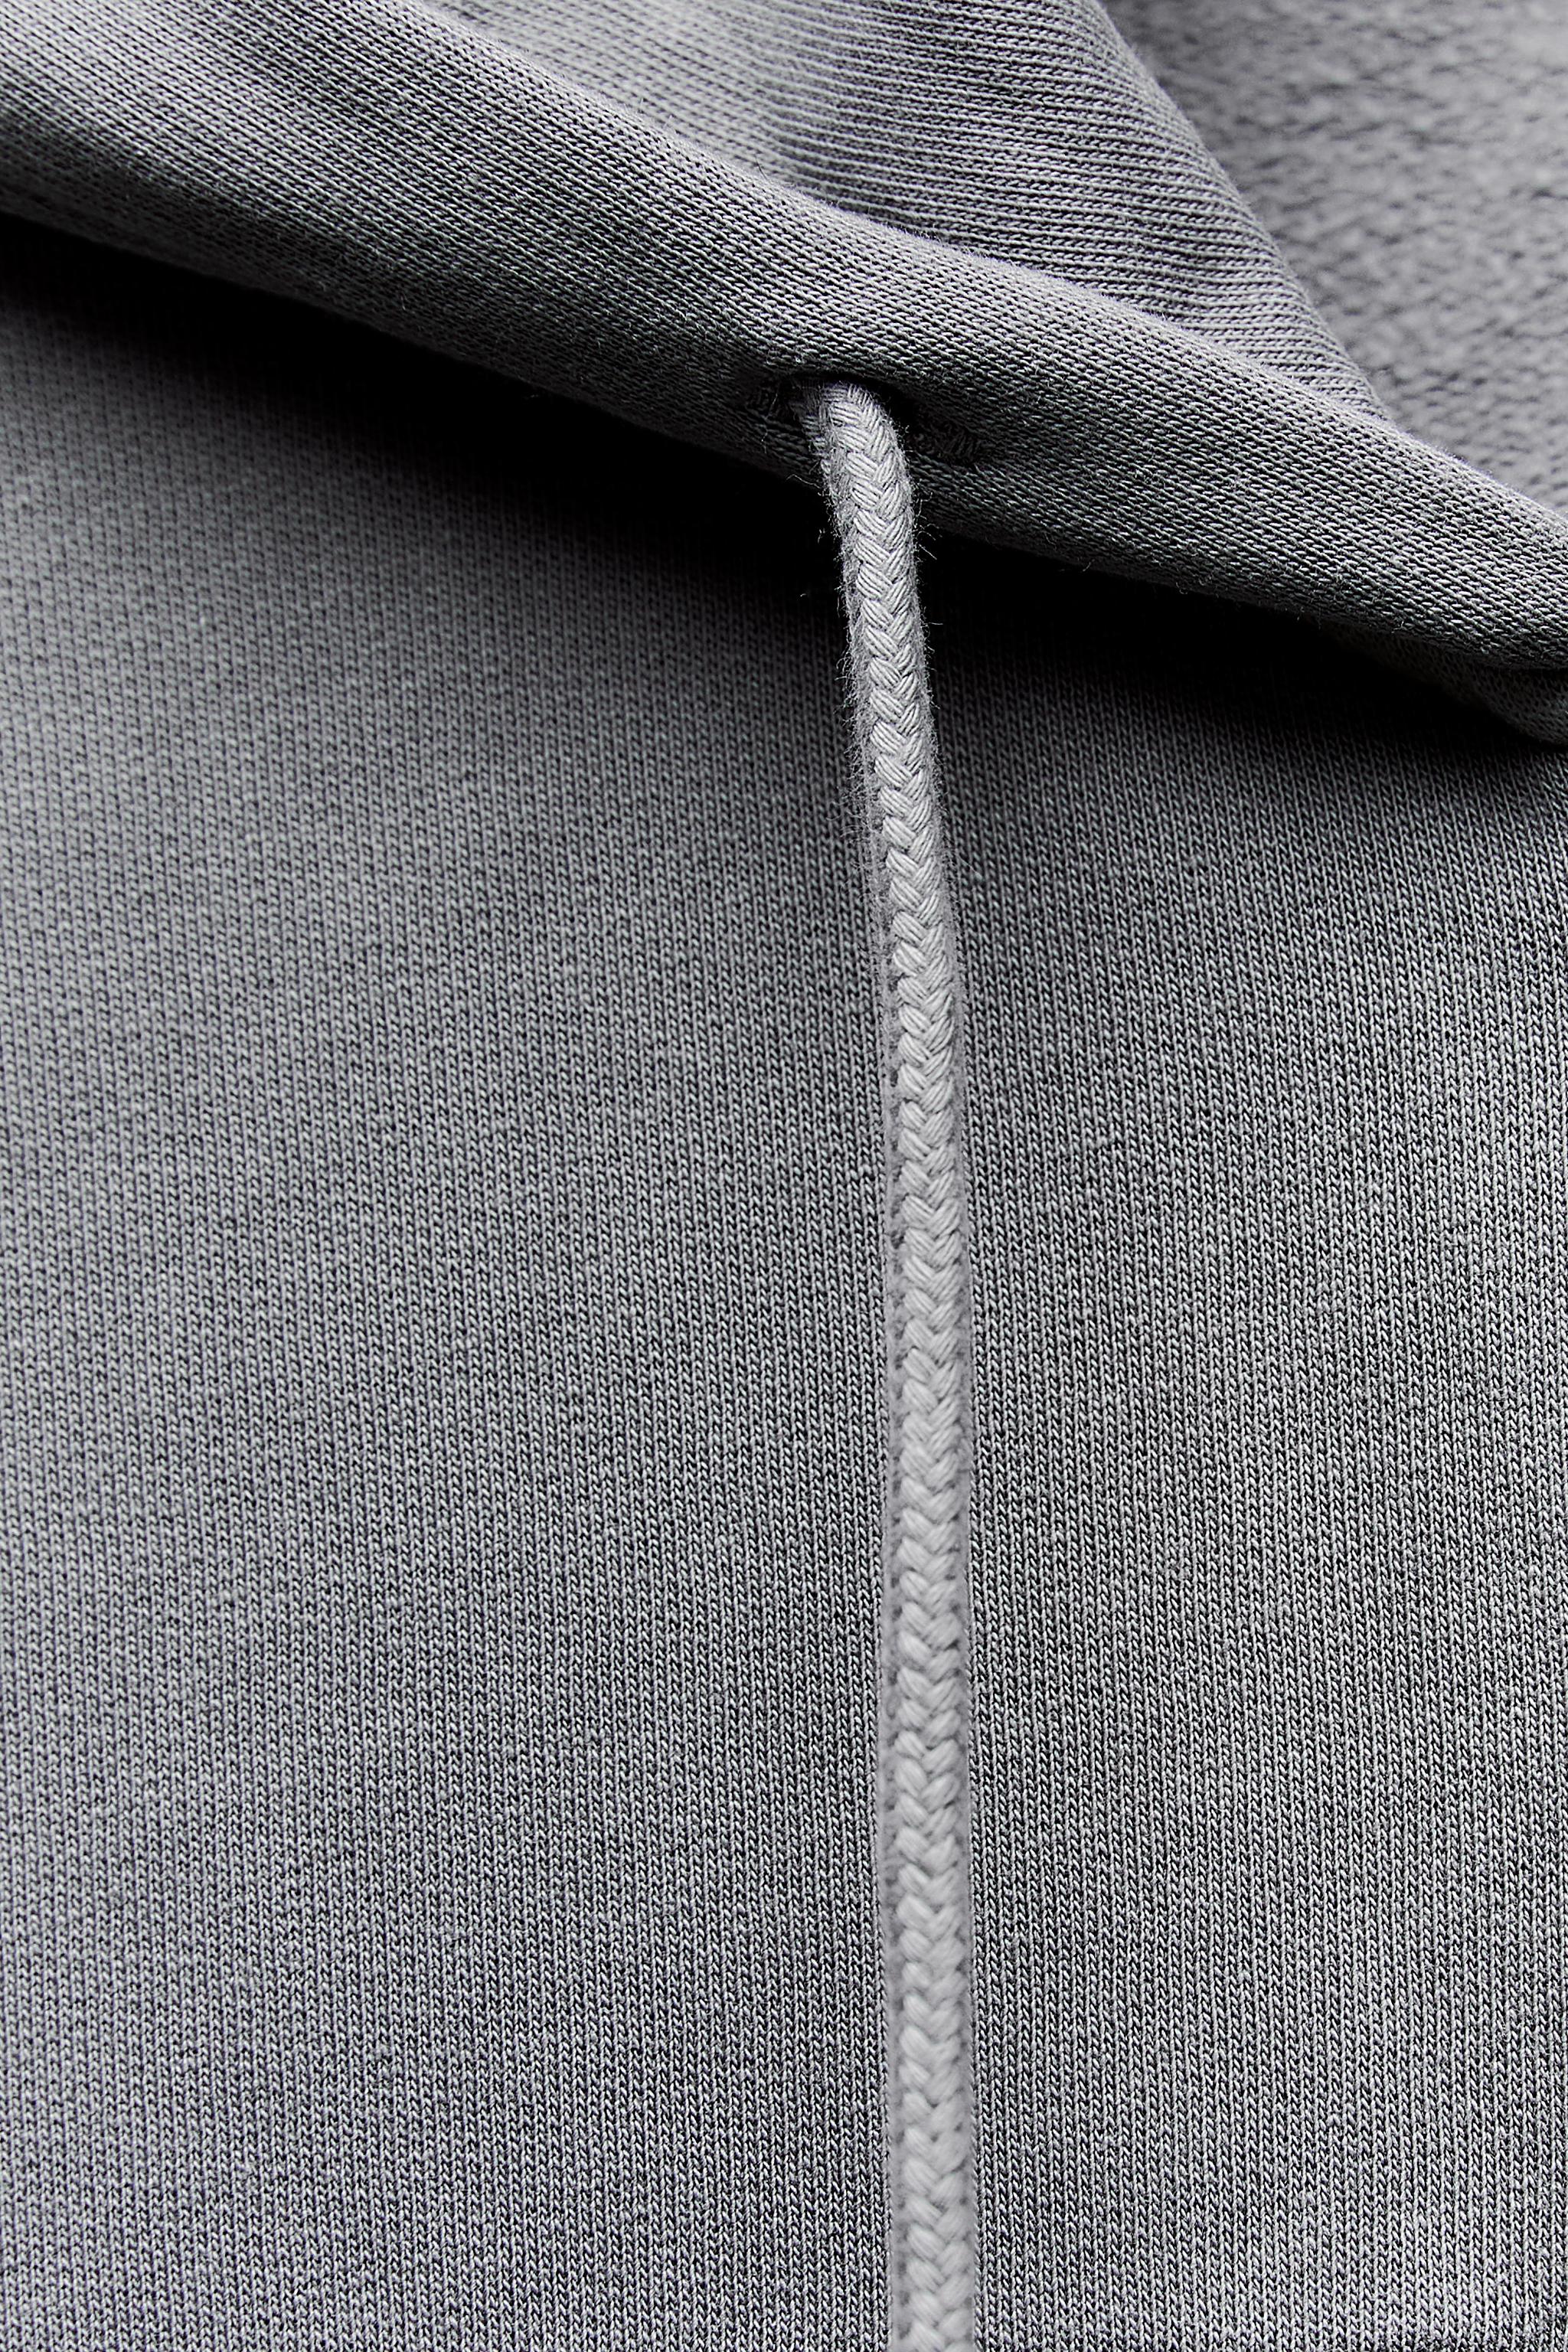 Sweatshirt with adjustable drawstring hood. Long sleeves with elastic  cuffs. Front pockets. Front metal zip closure.